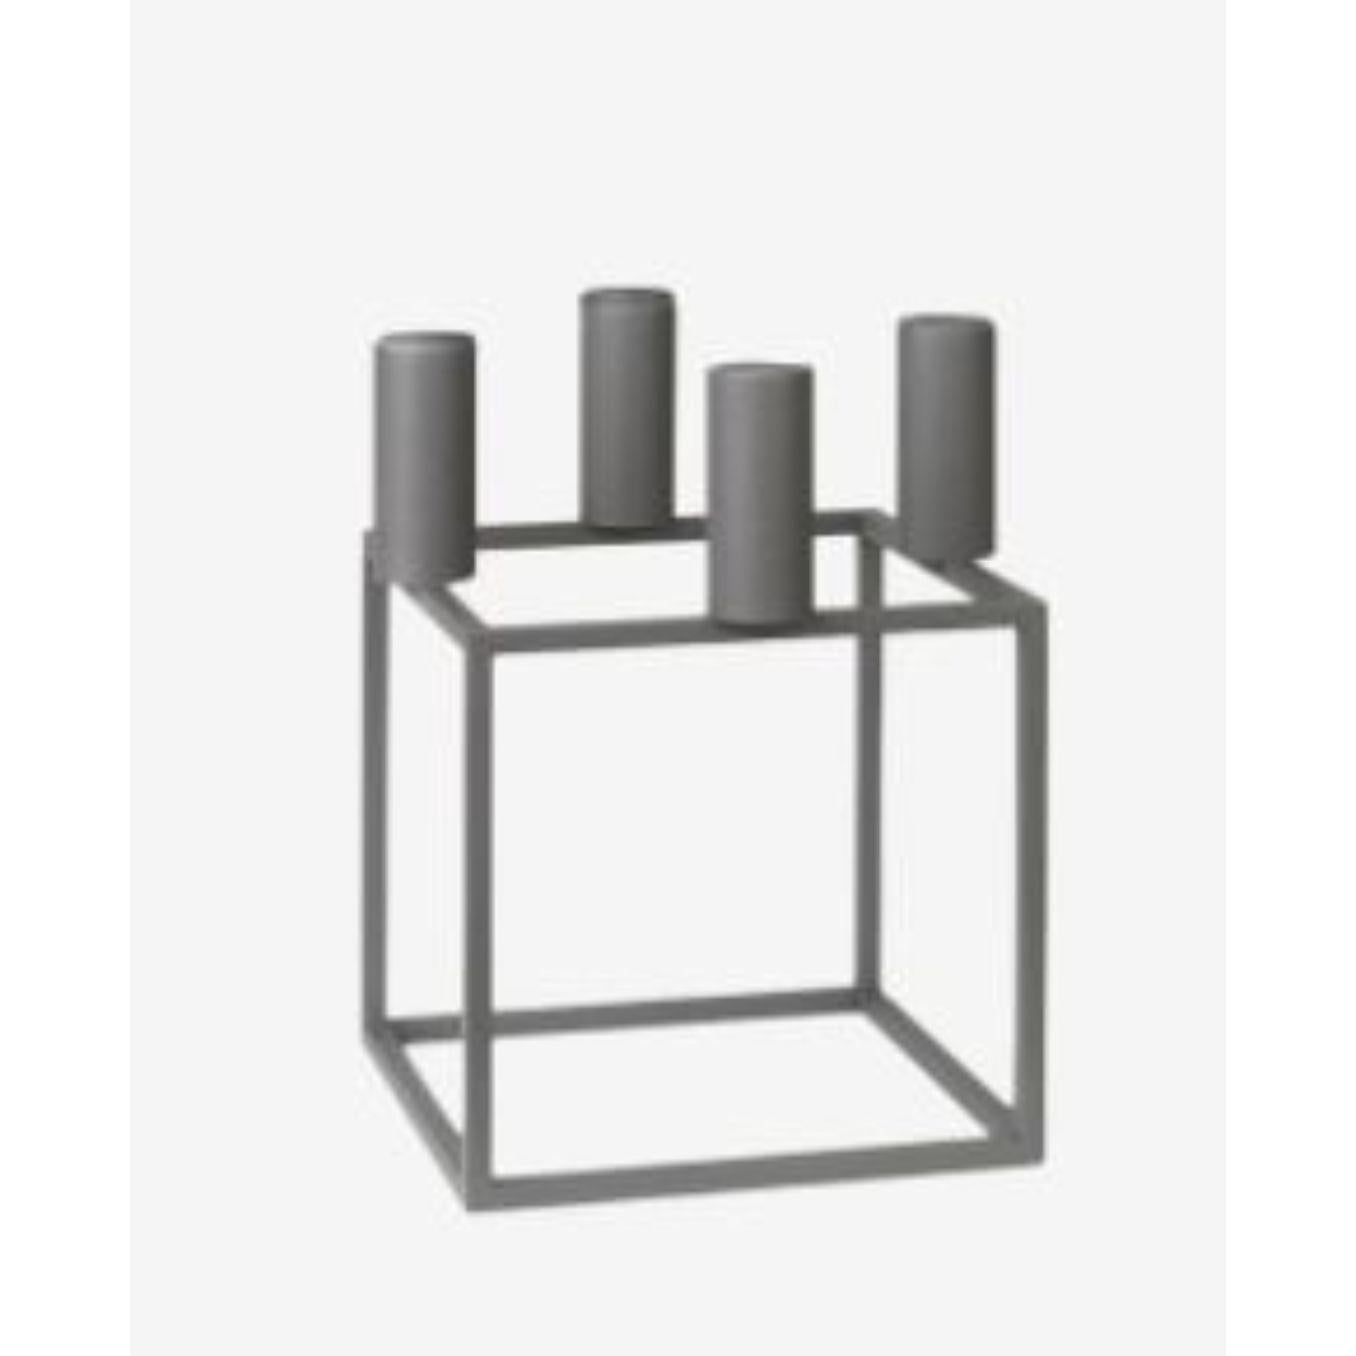 Grey Kubus 4 candle holder by Lassen
Dimensions: D 14 x W 14 x H 20 cm 
Materials: Metal 
Also available in different dimensions. 
Weight: 1.50 Kg

A new small wonder has seen the light of day. Kubus Micro is a stylish, smaller version of the